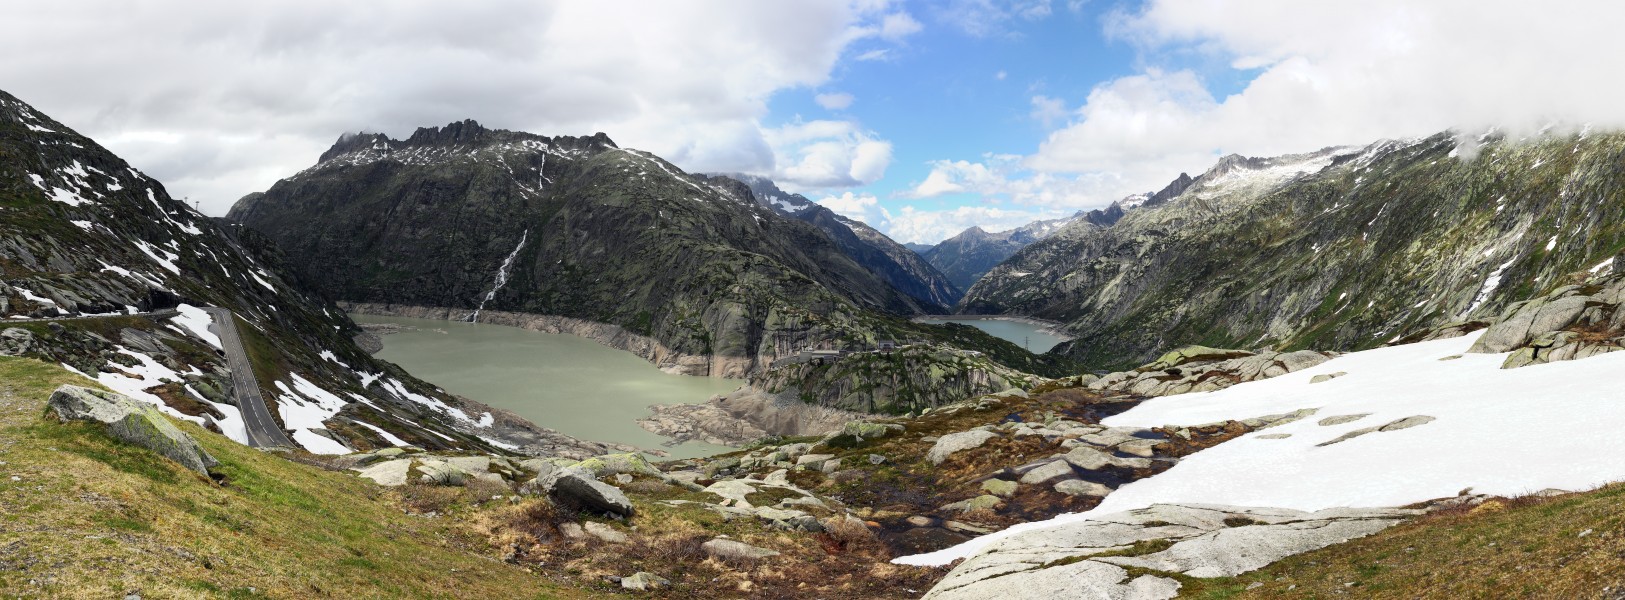 Panorama view of the Lake Grimsel and Räterichsbodensee